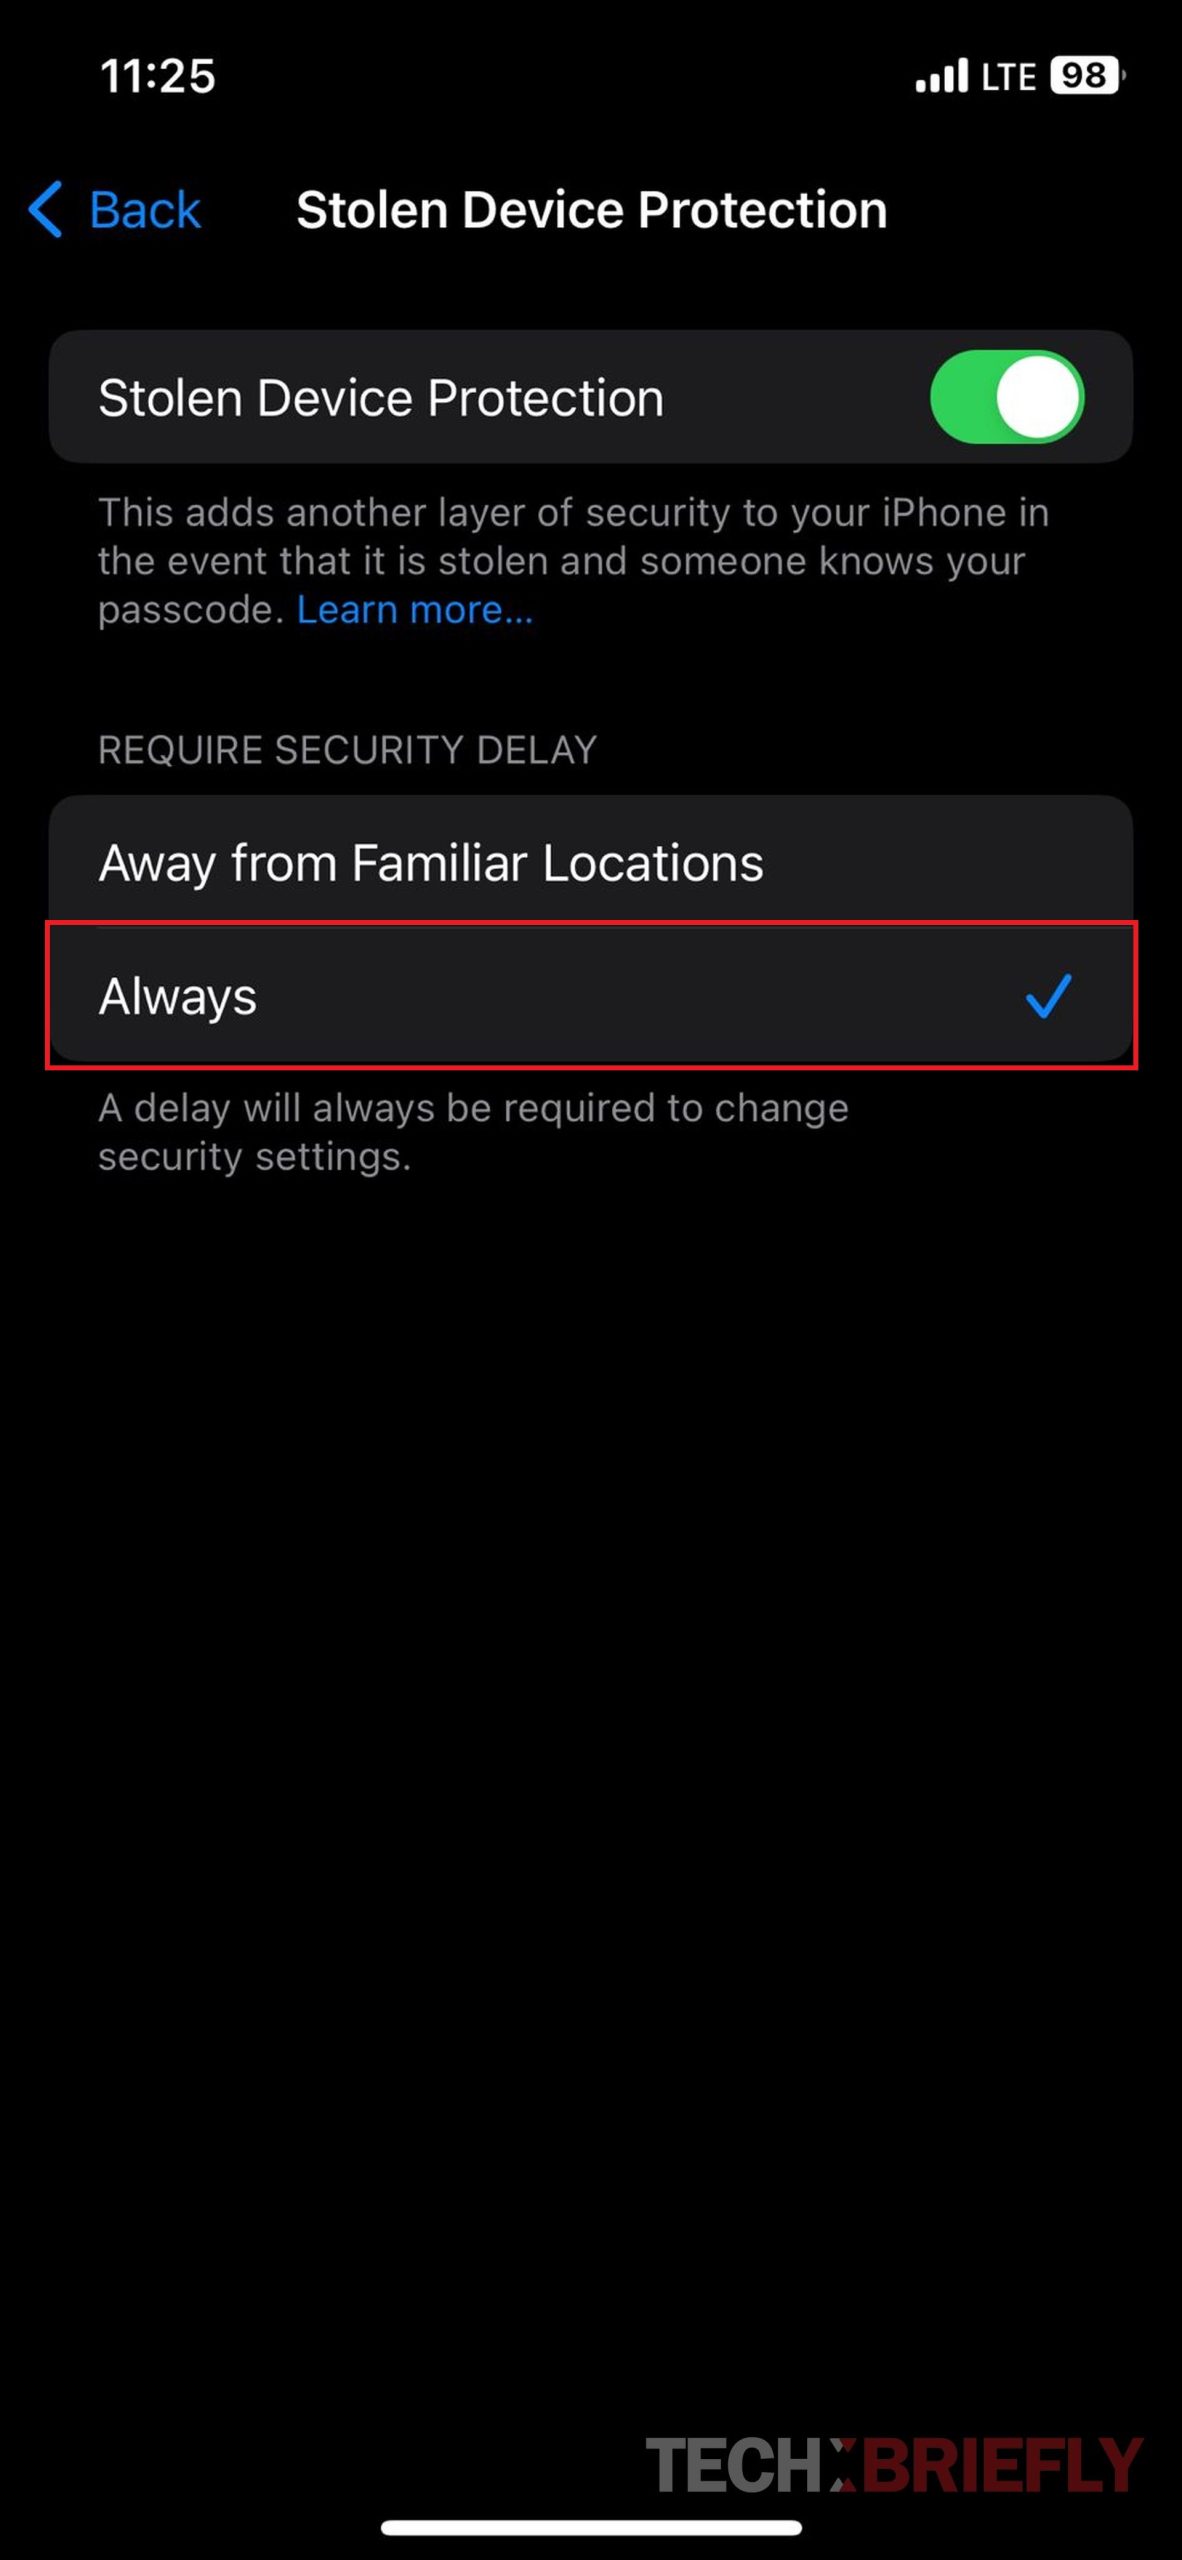 How to set iPhone Theft Protection settings?